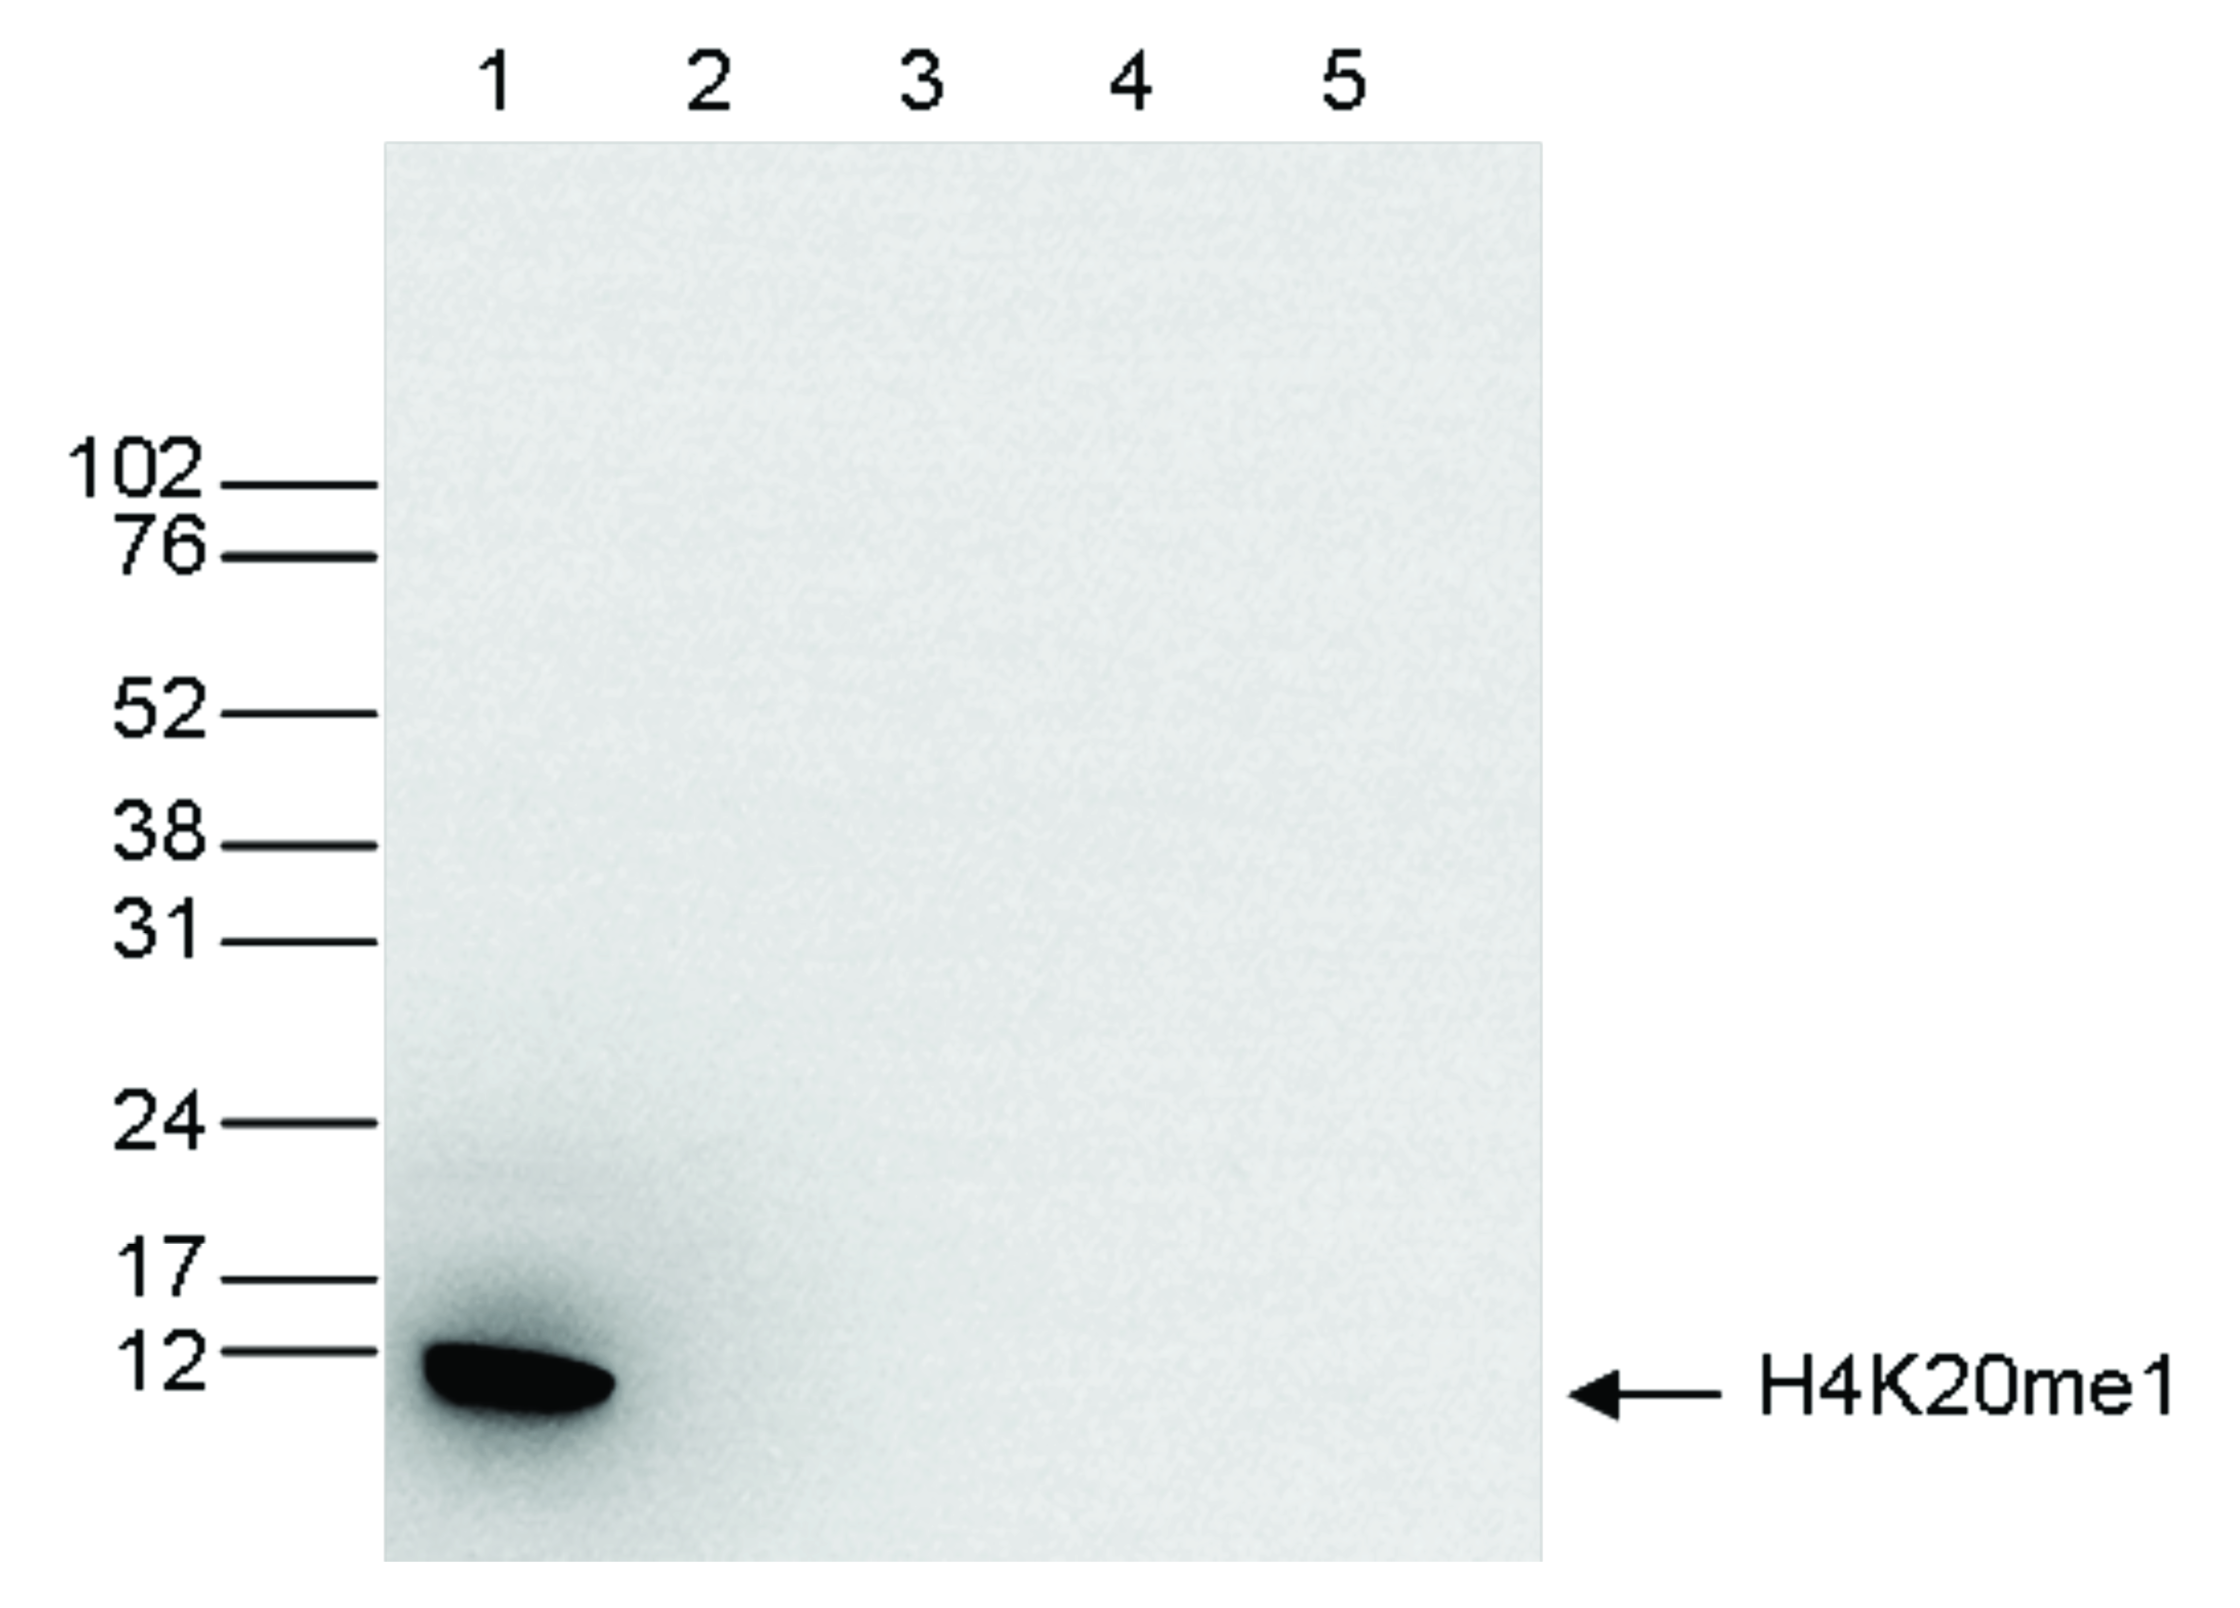 Western blot was performed on whole cell extracts (25 μg, lane 1) from HeLa cells, and on 1 μg of recombinant histone H2A, H2B, H3 and H4 (lane 2, 3, 4 and 5, respectively) using the Bioss antibody against H4K20me1 (cat. No. bs-53104R). The antibody was diluted 1:1,000 in TBS-Tween containing 5% skimmed milk. The marker (in kDa) is shown on the left, the position of the protein is indicated on the right.